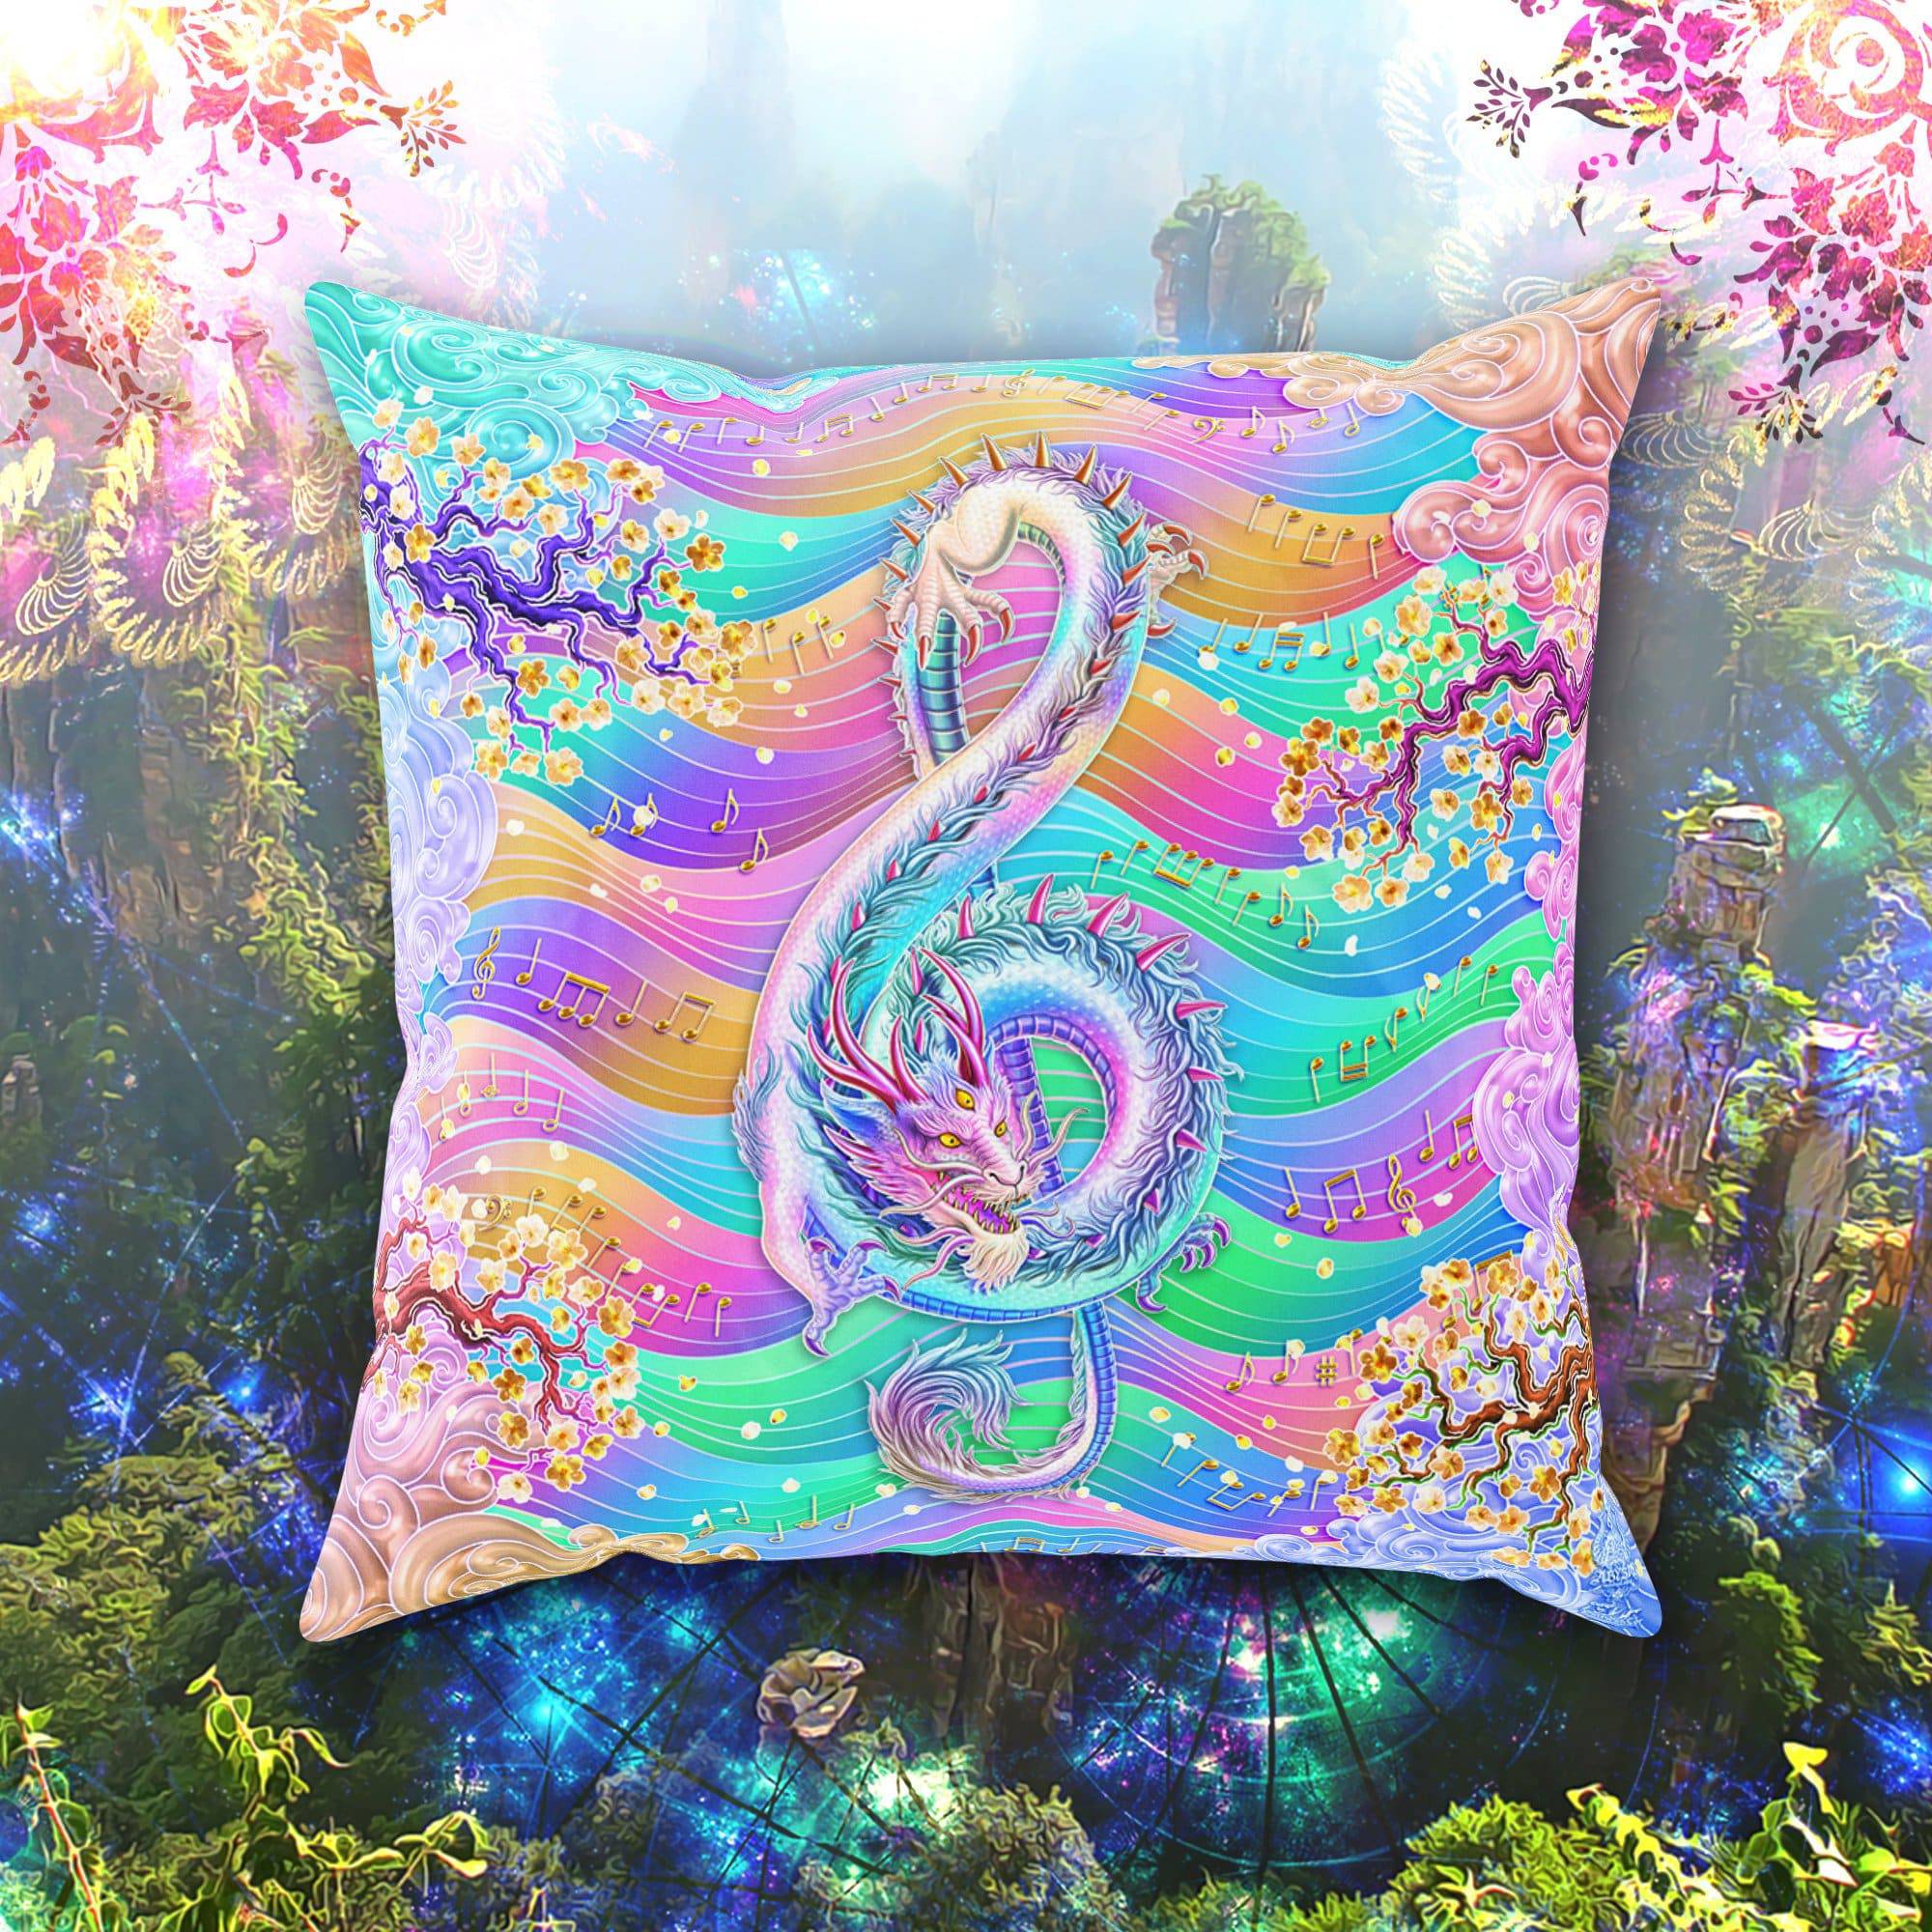 https://cdn.shopify.com/s/files/1/0584/5608/0574/products/holographic-throw-pillow-decorative-accent-cushion-aesthetic-room-decor-music-art-fairy-kei-and-yume-kawaii-style-funky-and-eclectic-home-treble-clef-pastel-dra-128223.jpg?v=1686689761&width=4000